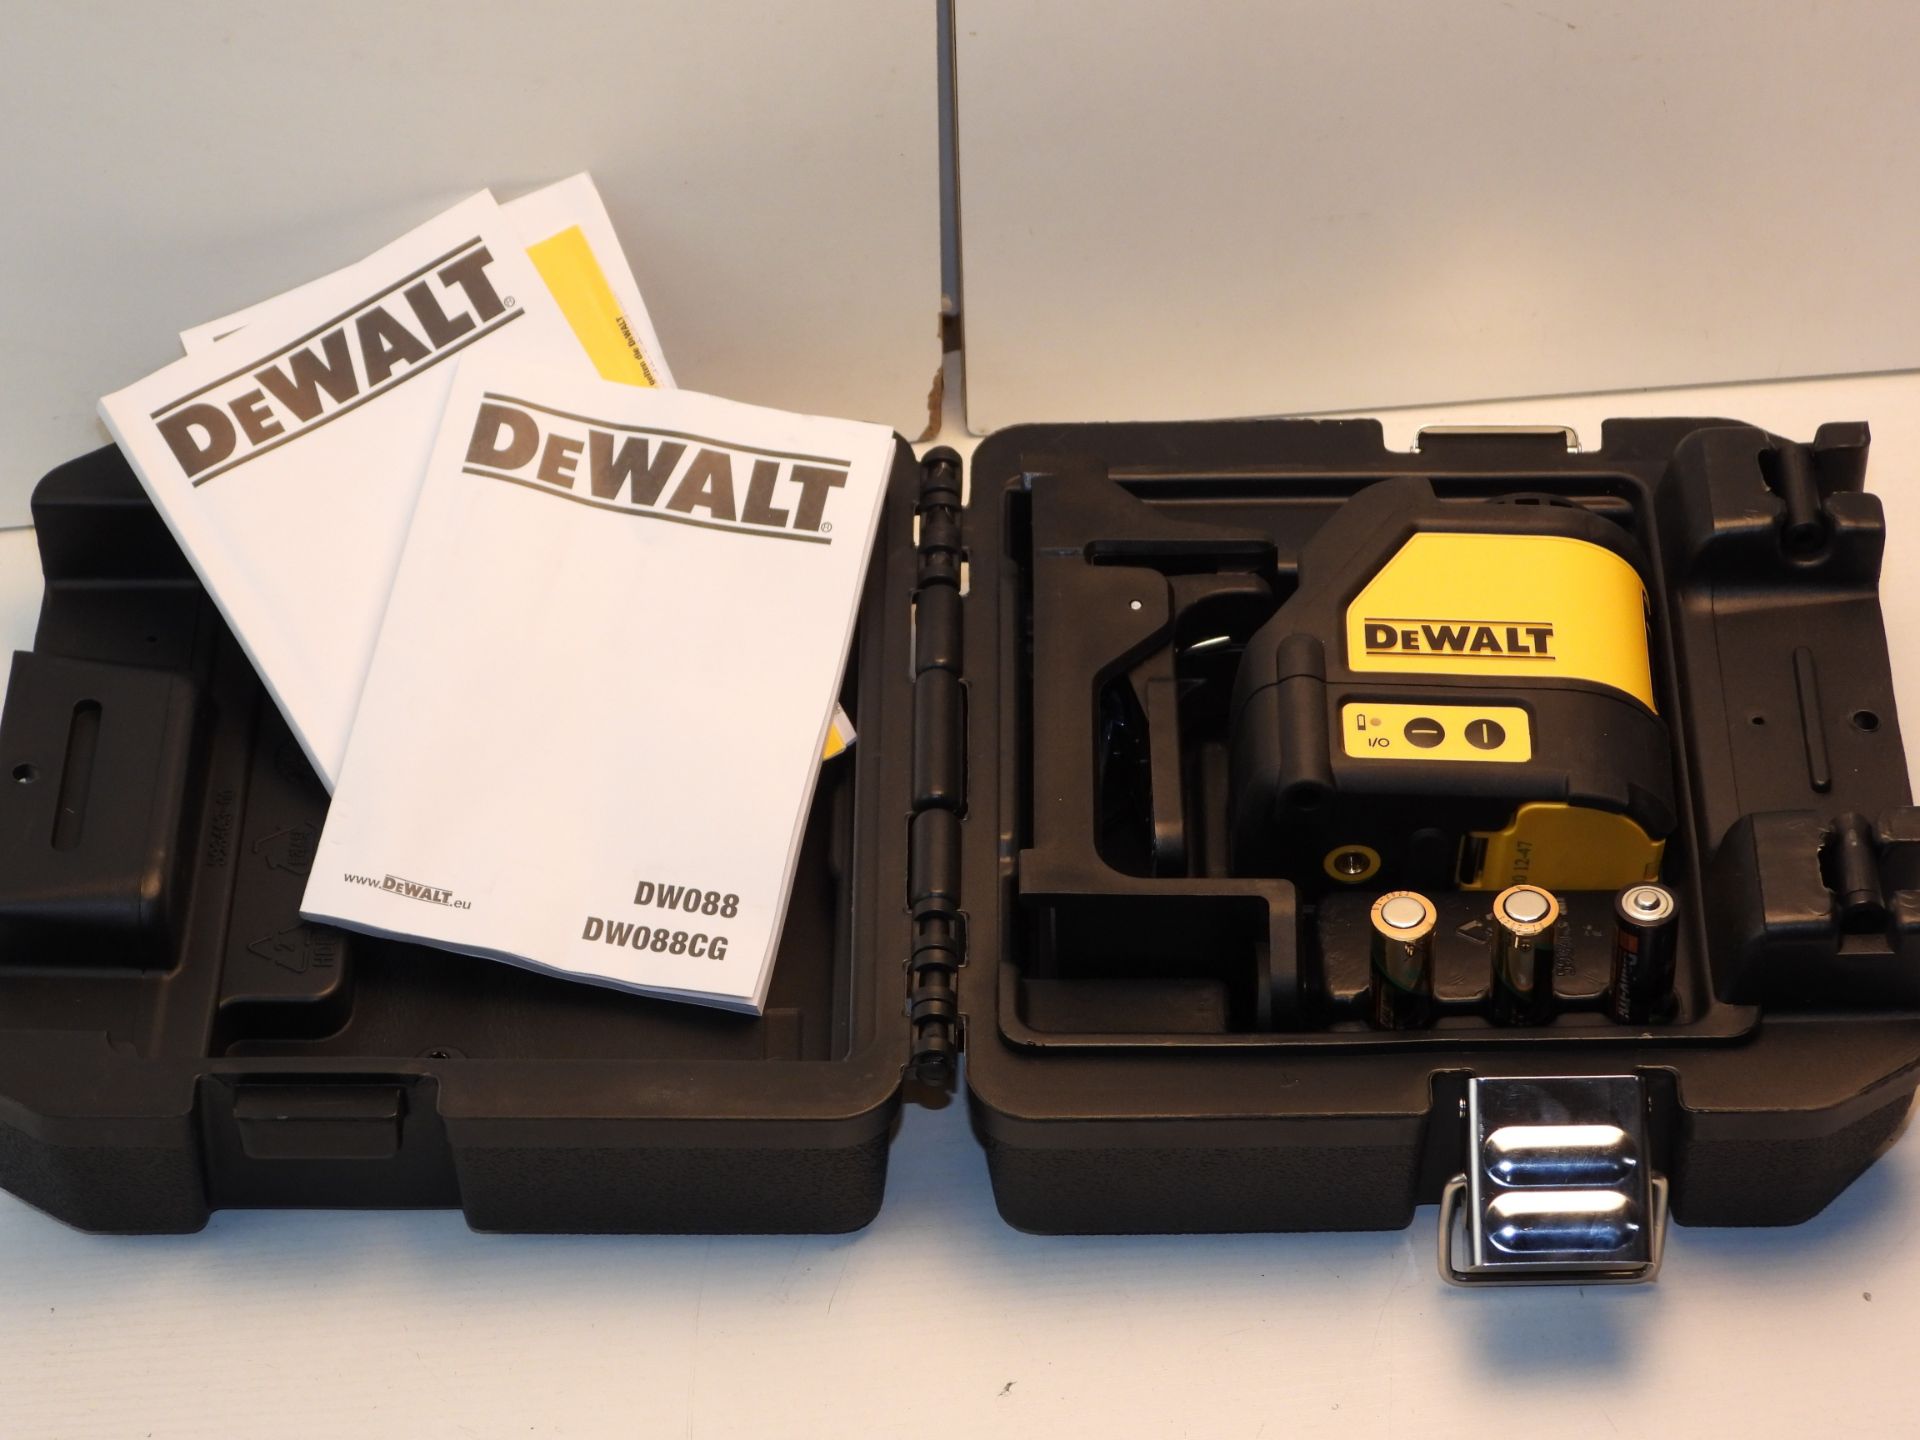 UNBOXED WITH PROTECTIVE CASE DEEWALT DW088 SELF-LEVELLING CROSS LINE LASER RRP £114.95Condition